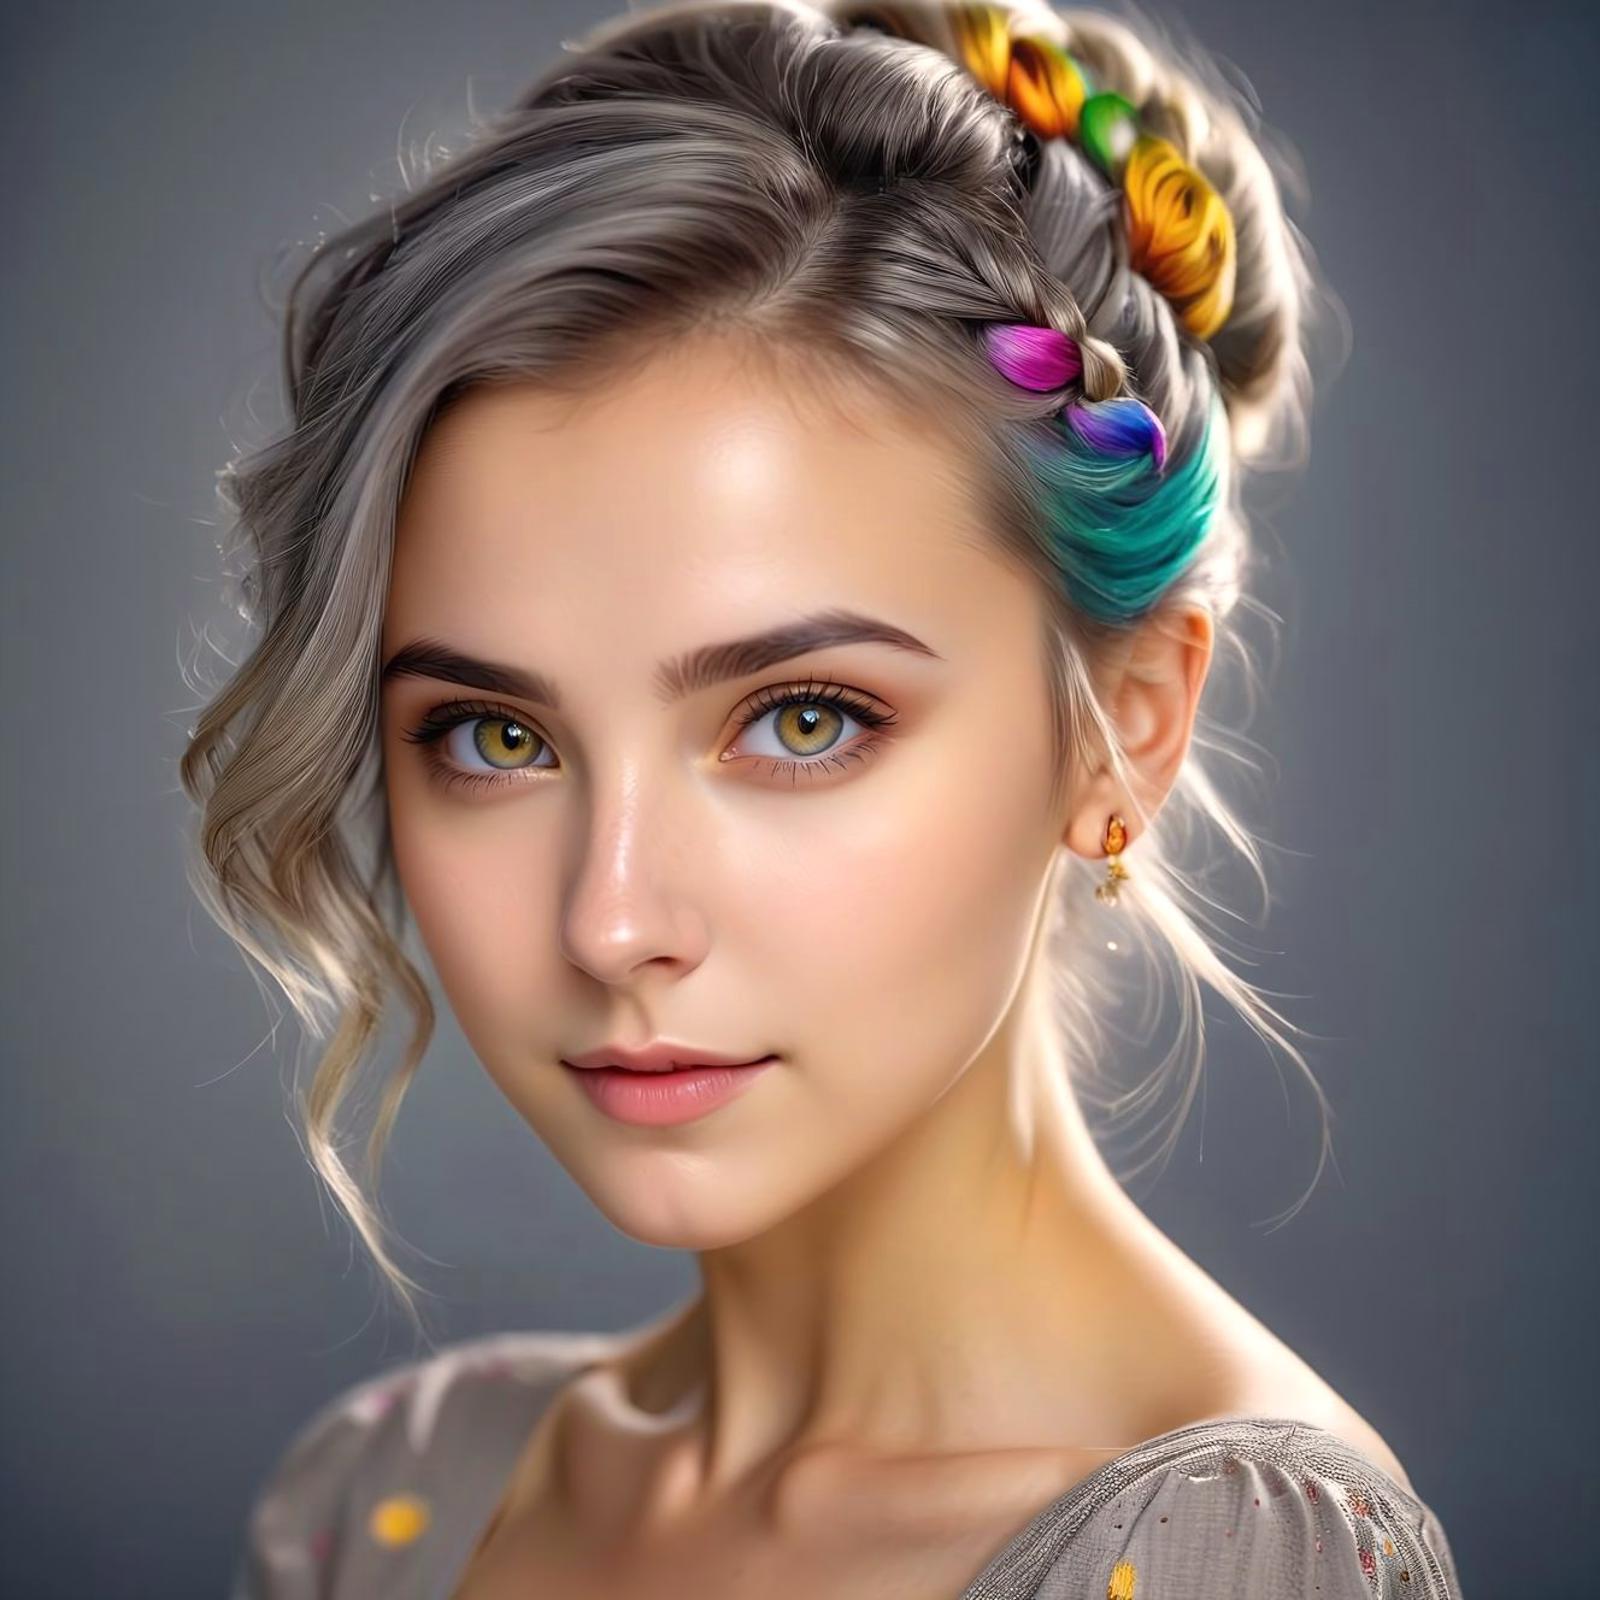 A young woman with a gray bun and rainbow hair clips.